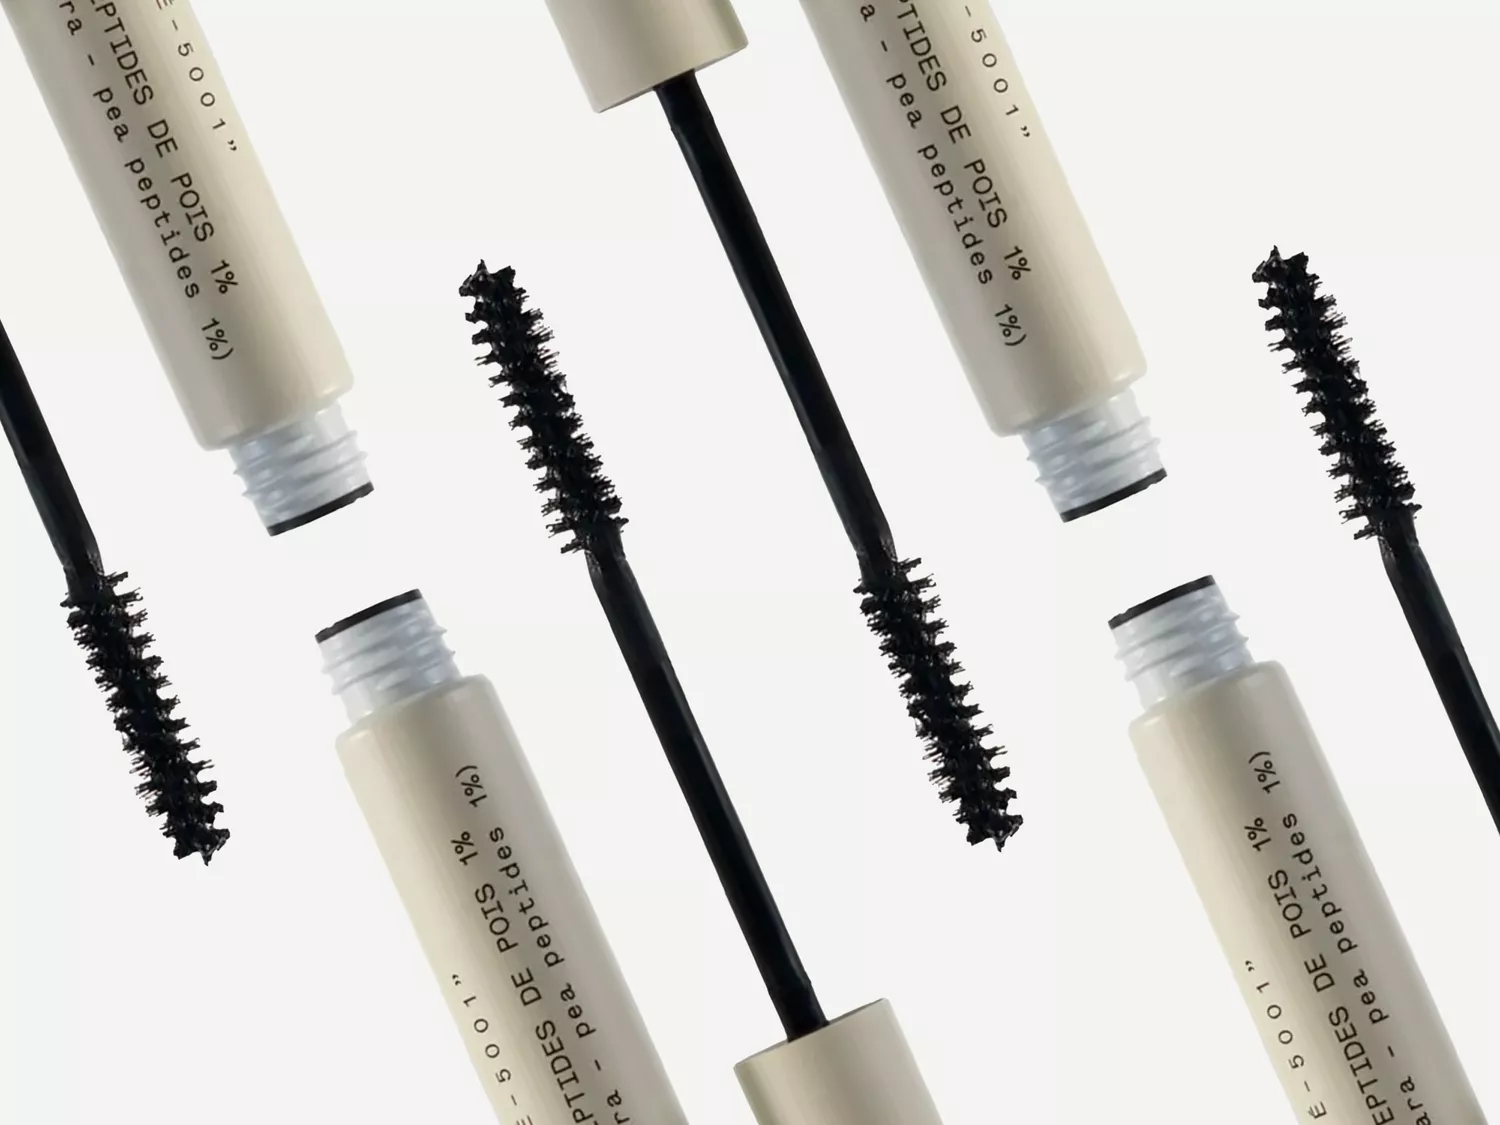 The Growth Serum-Infused Mascara With an 11,000-Person Waitlist Is Back in Stock After 10 Months